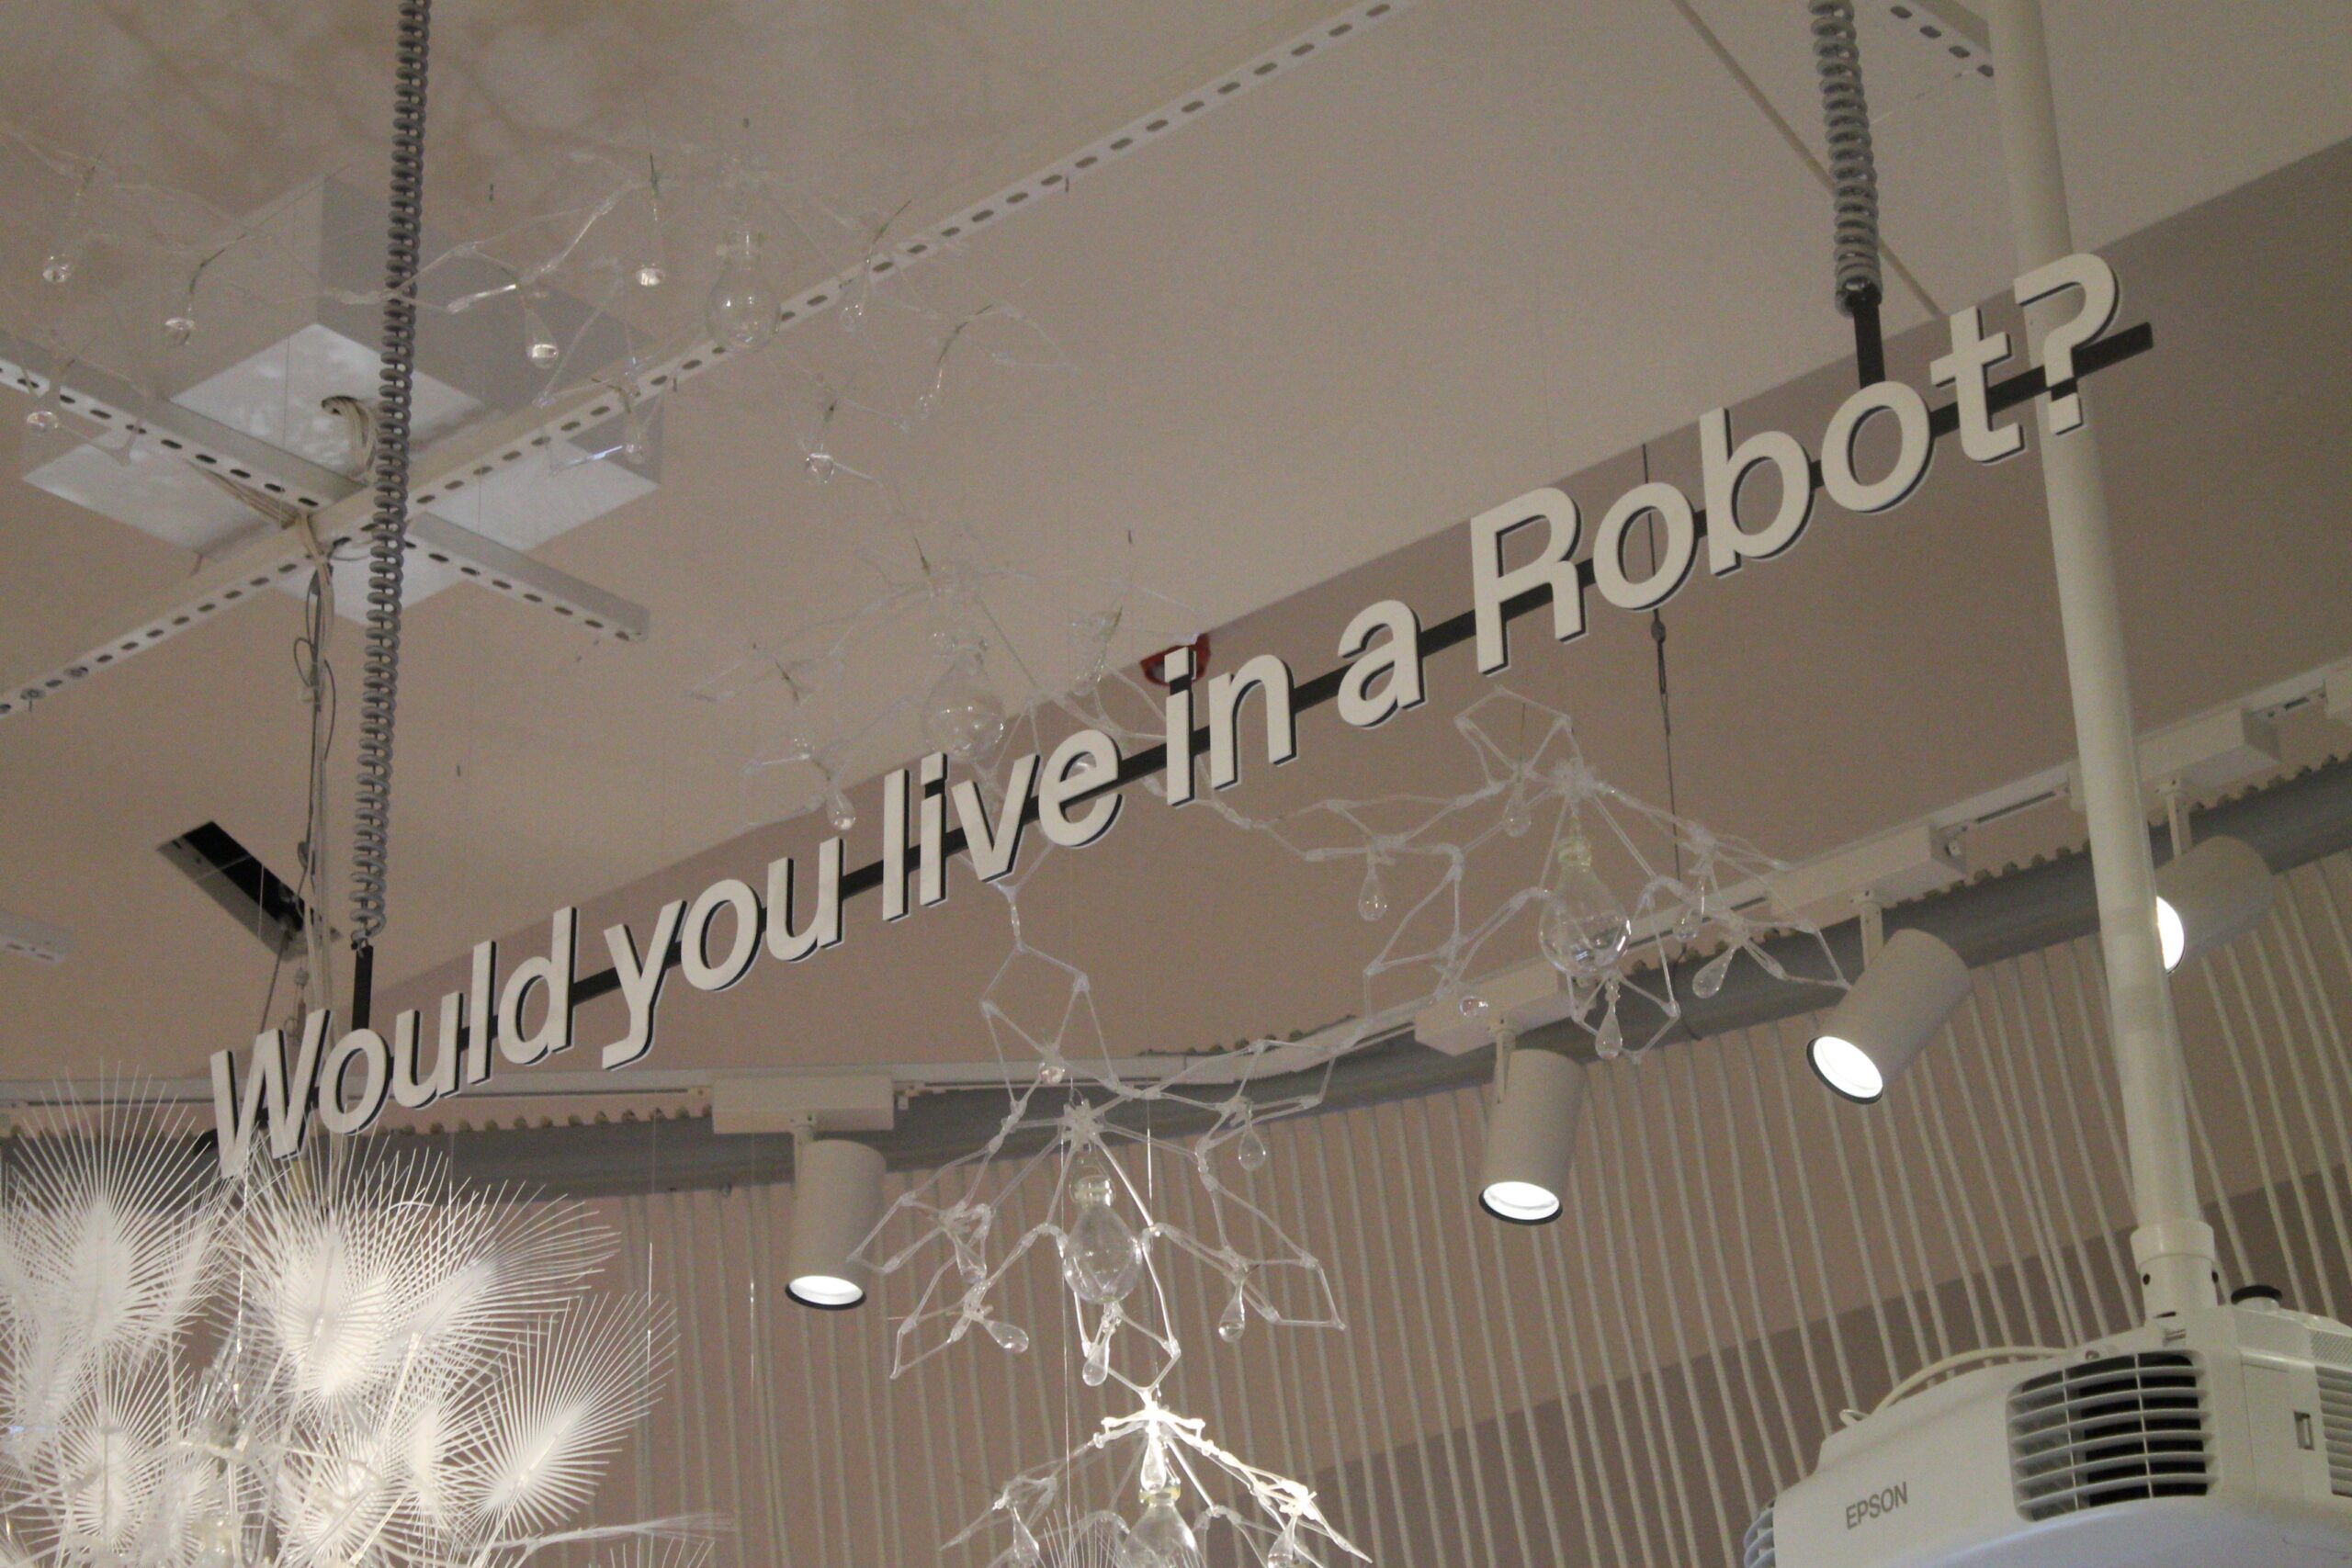 Would you live in a Robot?